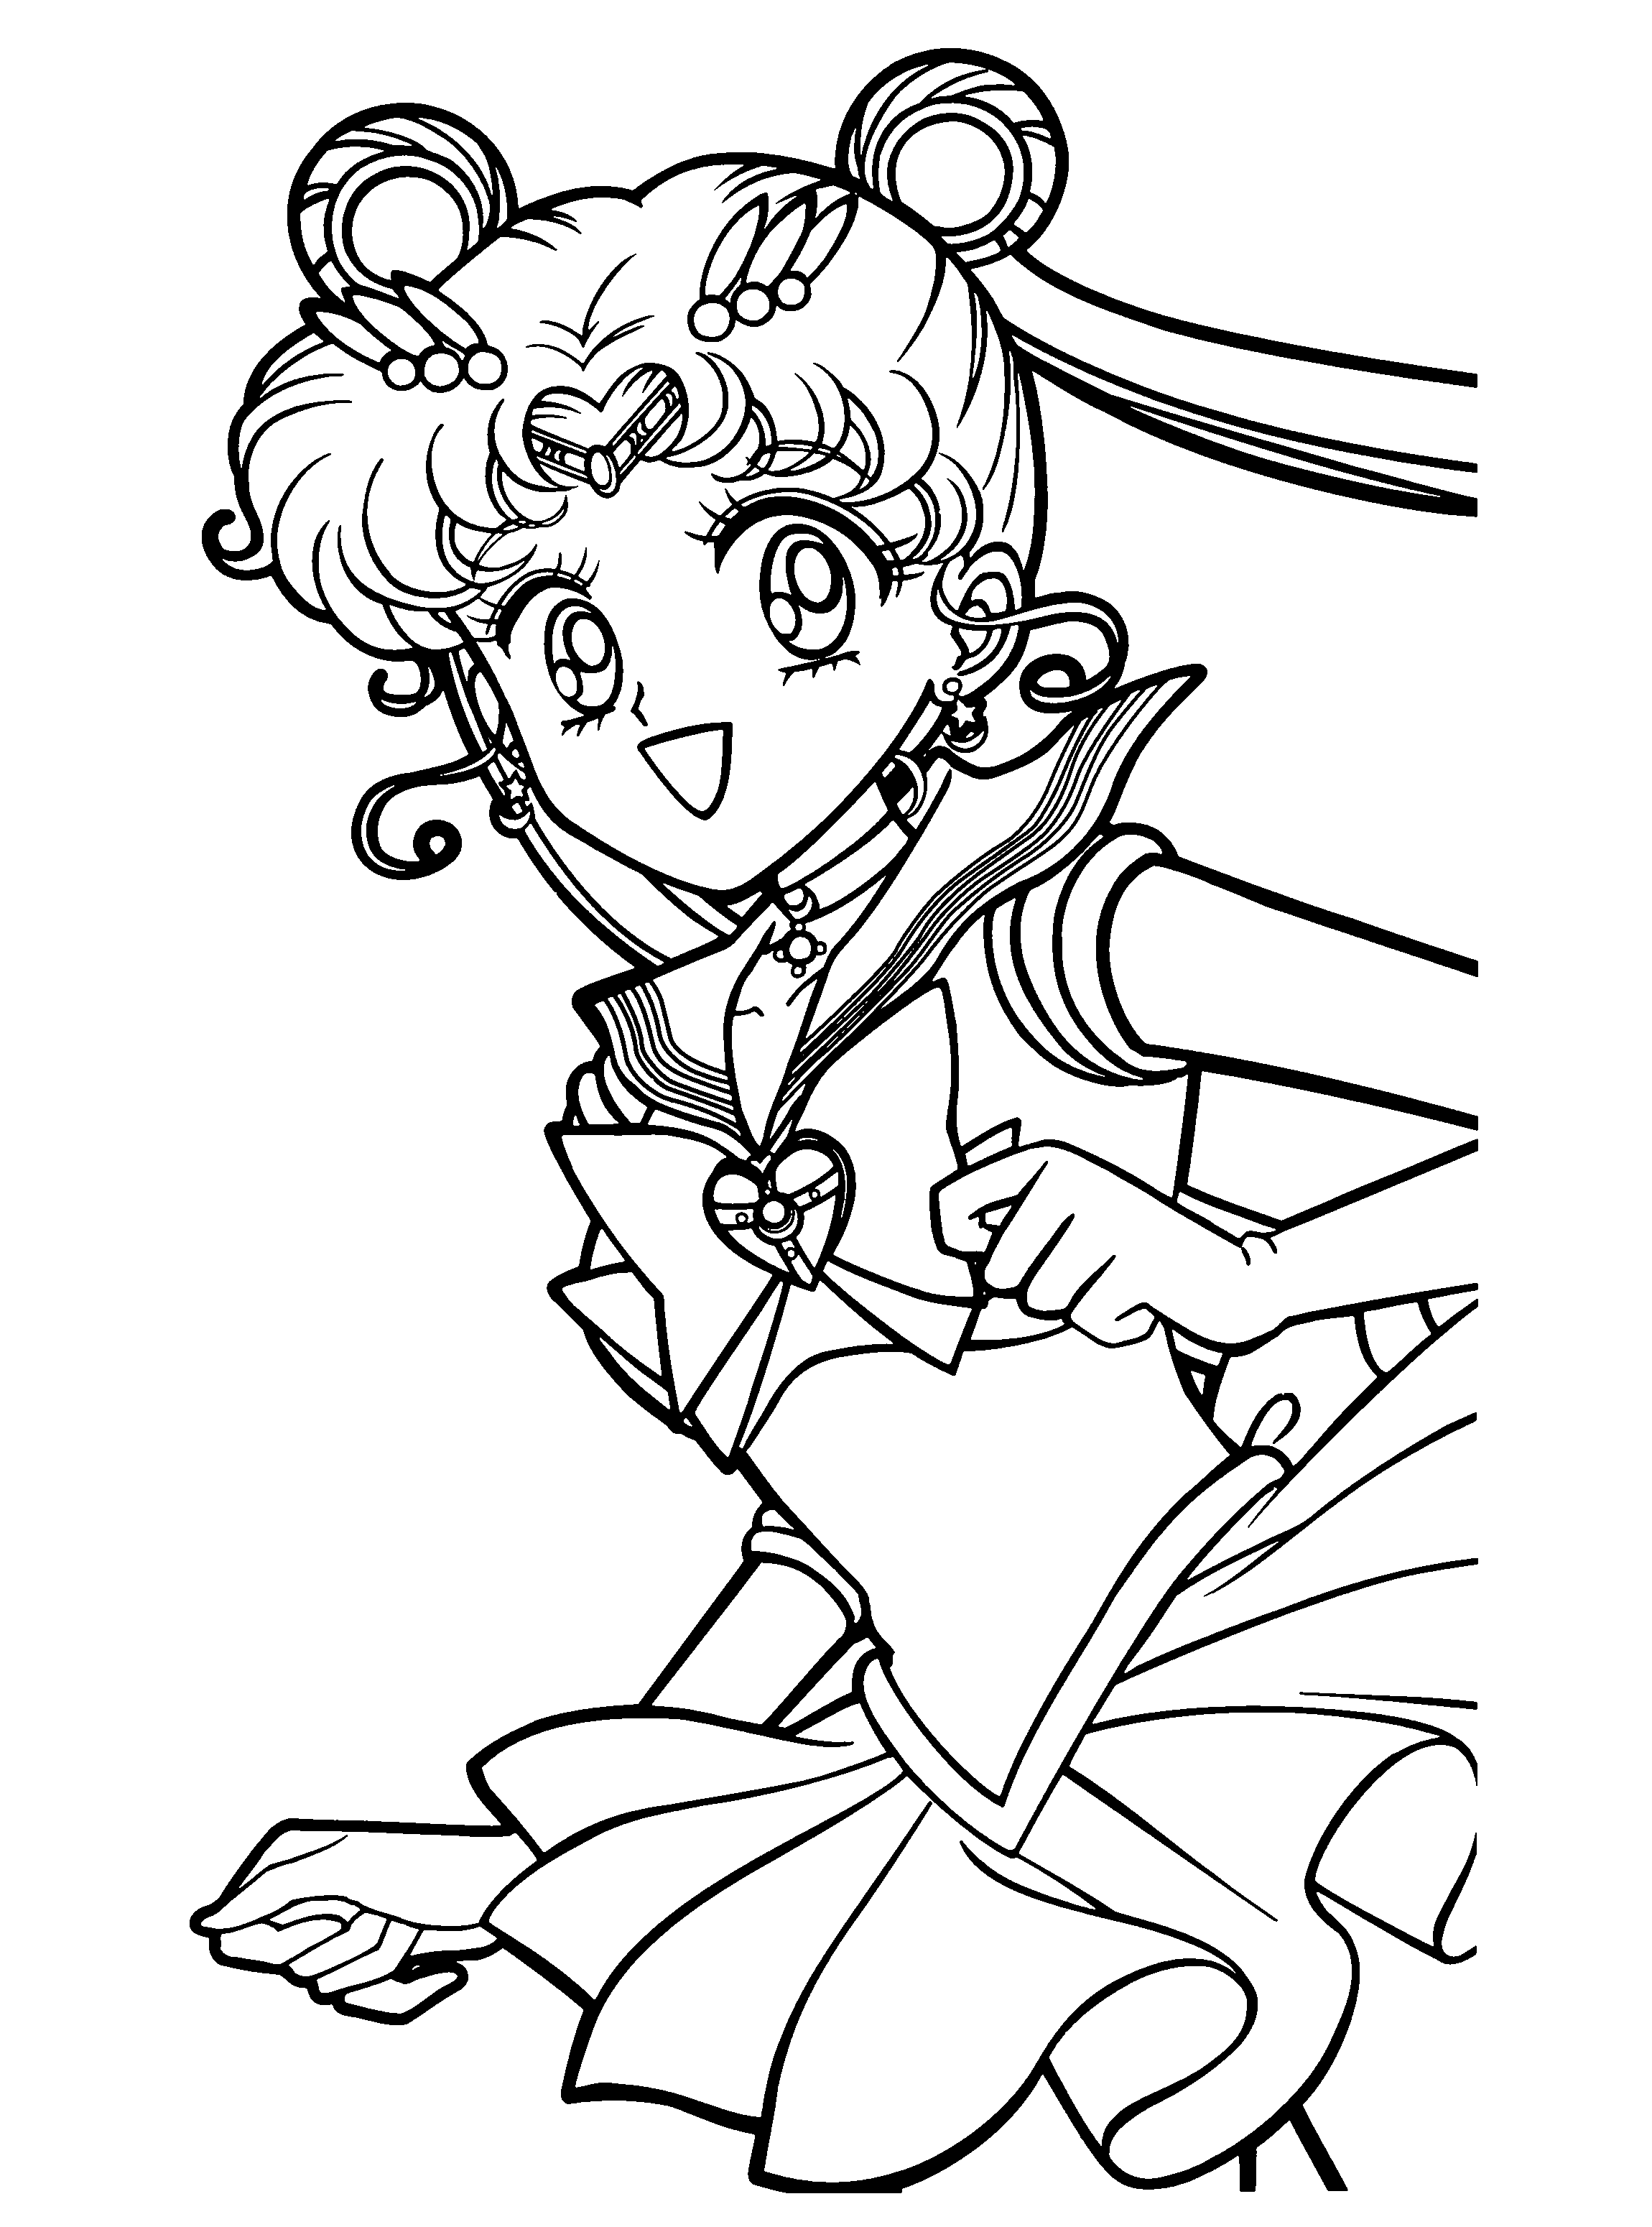 sailor moon coloring pages free printable sailor moon coloring pages for kids pages coloring sailor moon 1 1